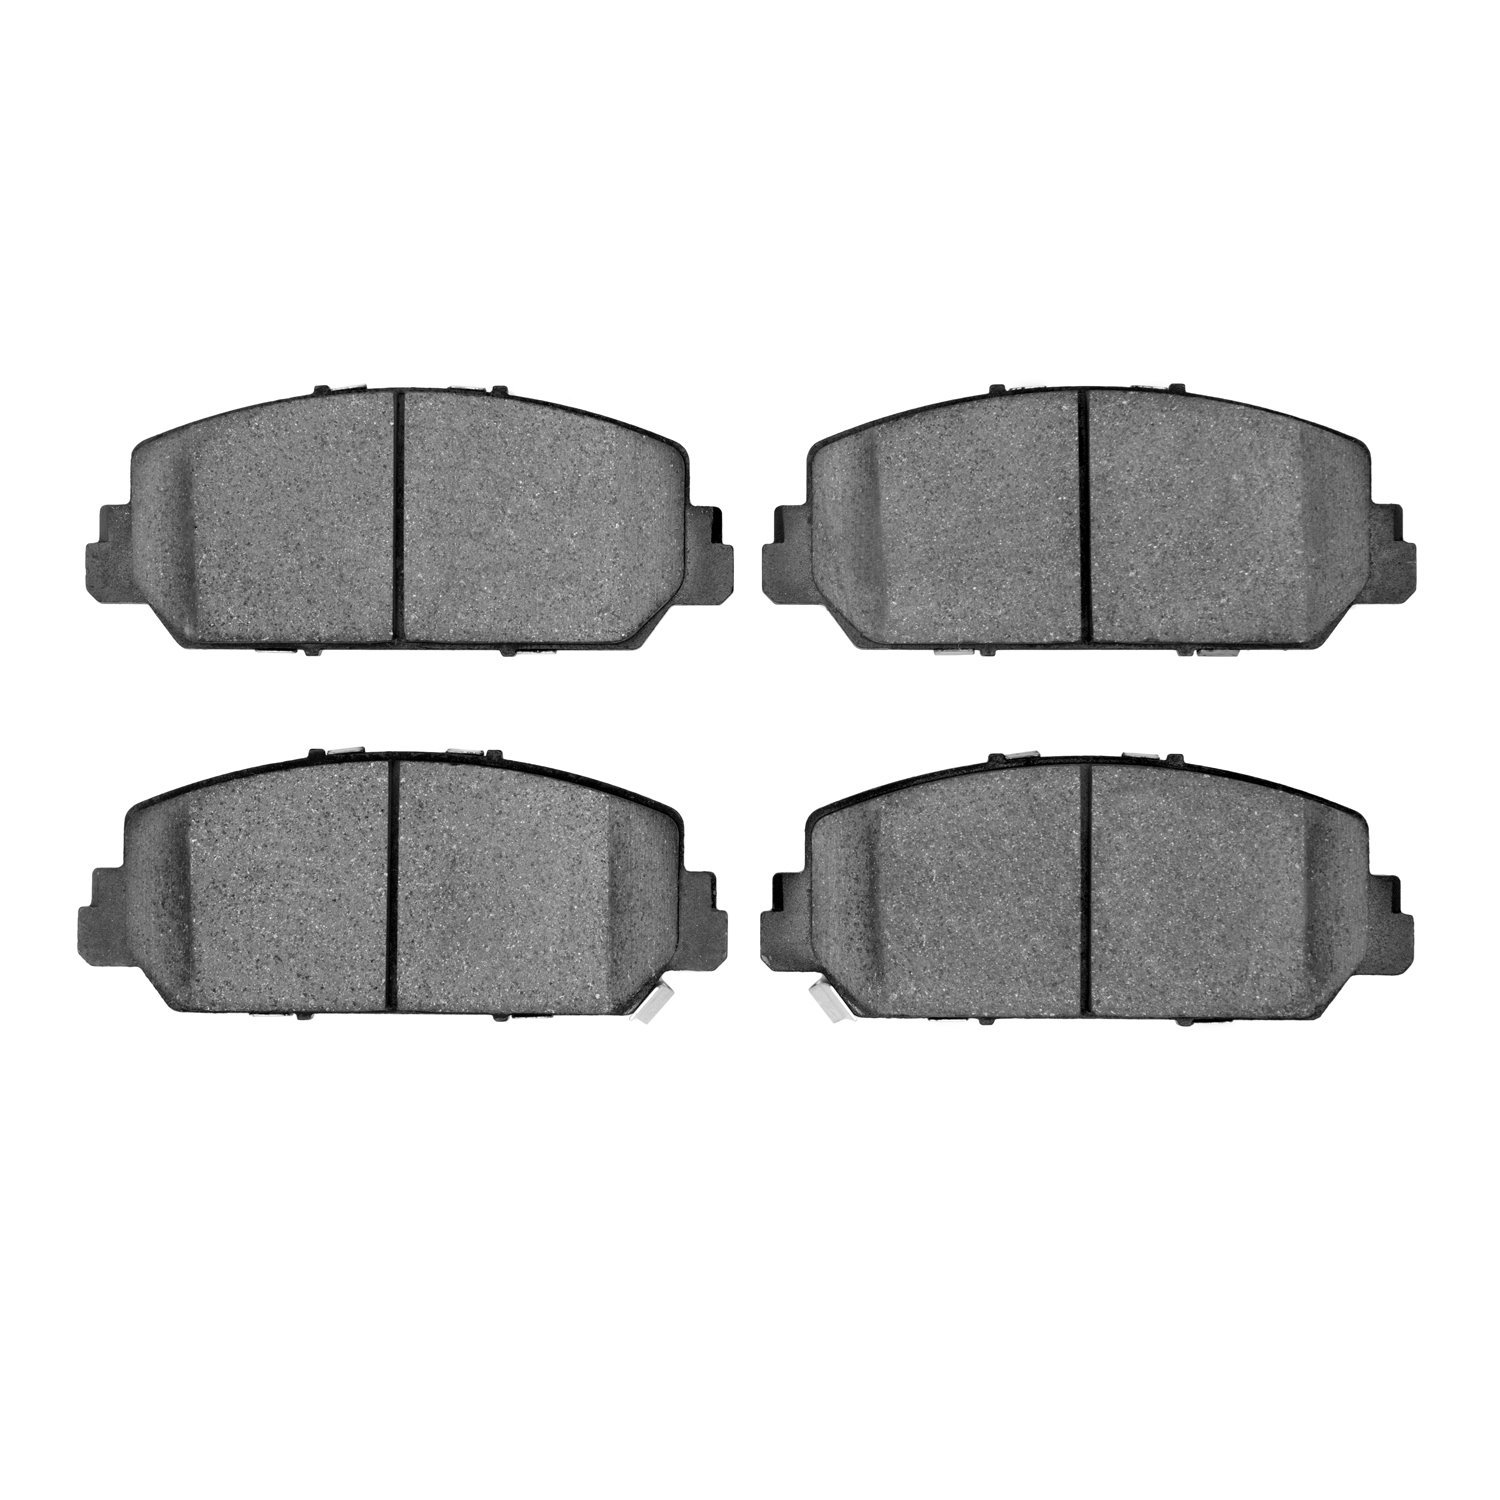 1000-1697-00 Track/Street Low-Metallic Brake Pads Kit, Fits Select Acura/Honda, Position: Front